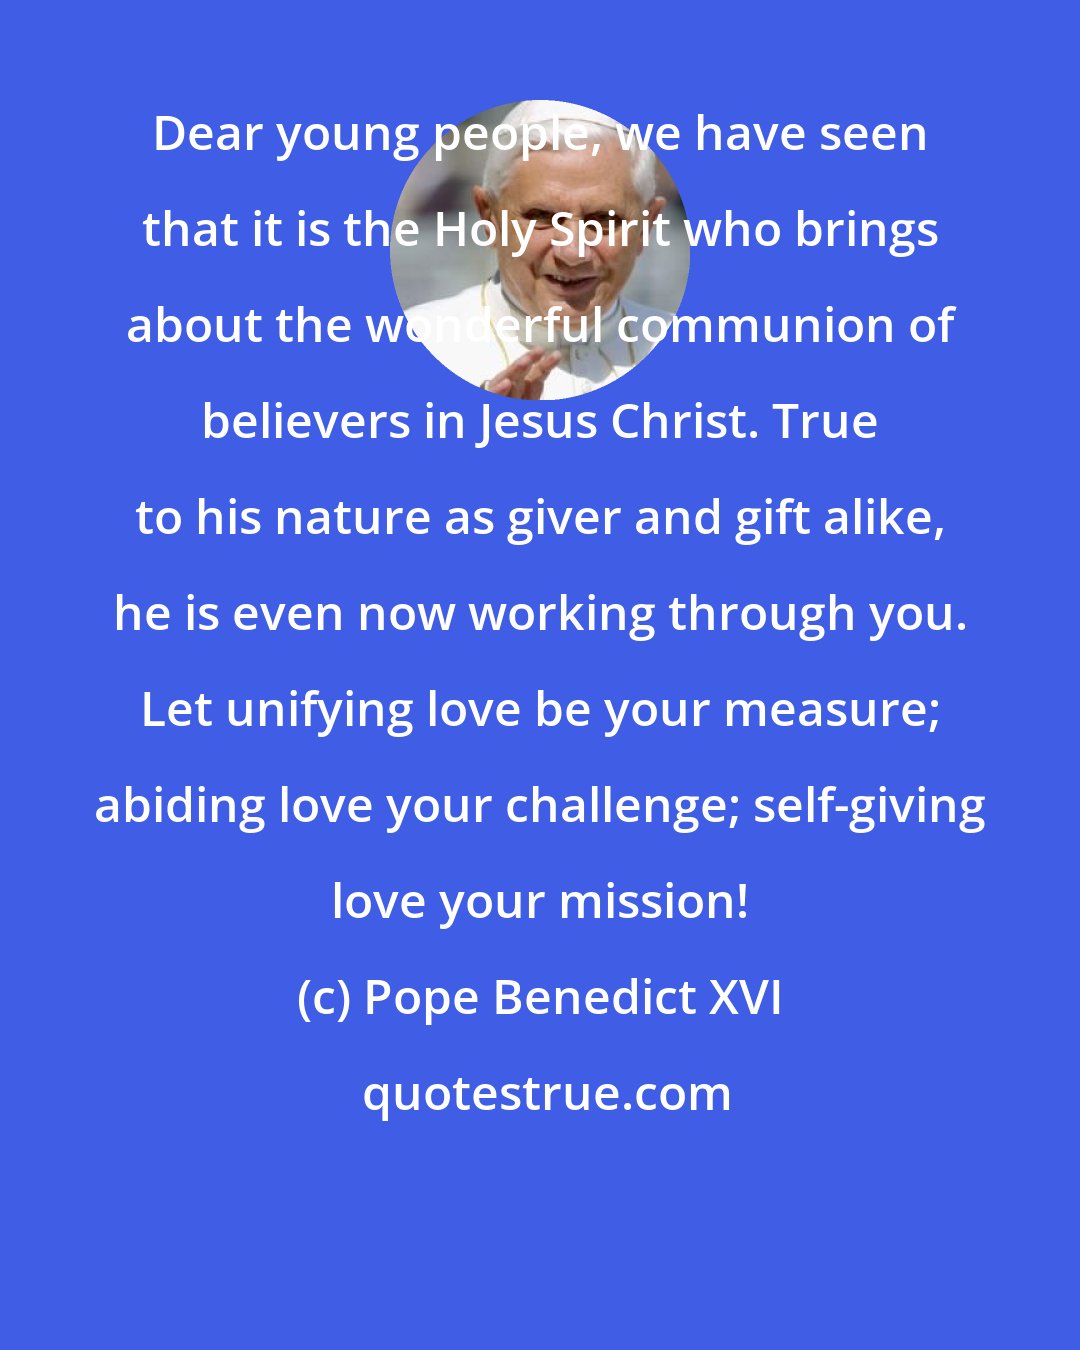 Pope Benedict XVI: Dear young people, we have seen that it is the Holy Spirit who brings about the wonderful communion of believers in Jesus Christ. True to his nature as giver and gift alike, he is even now working through you. Let unifying love be your measure; abiding love your challenge; self-giving love your mission!